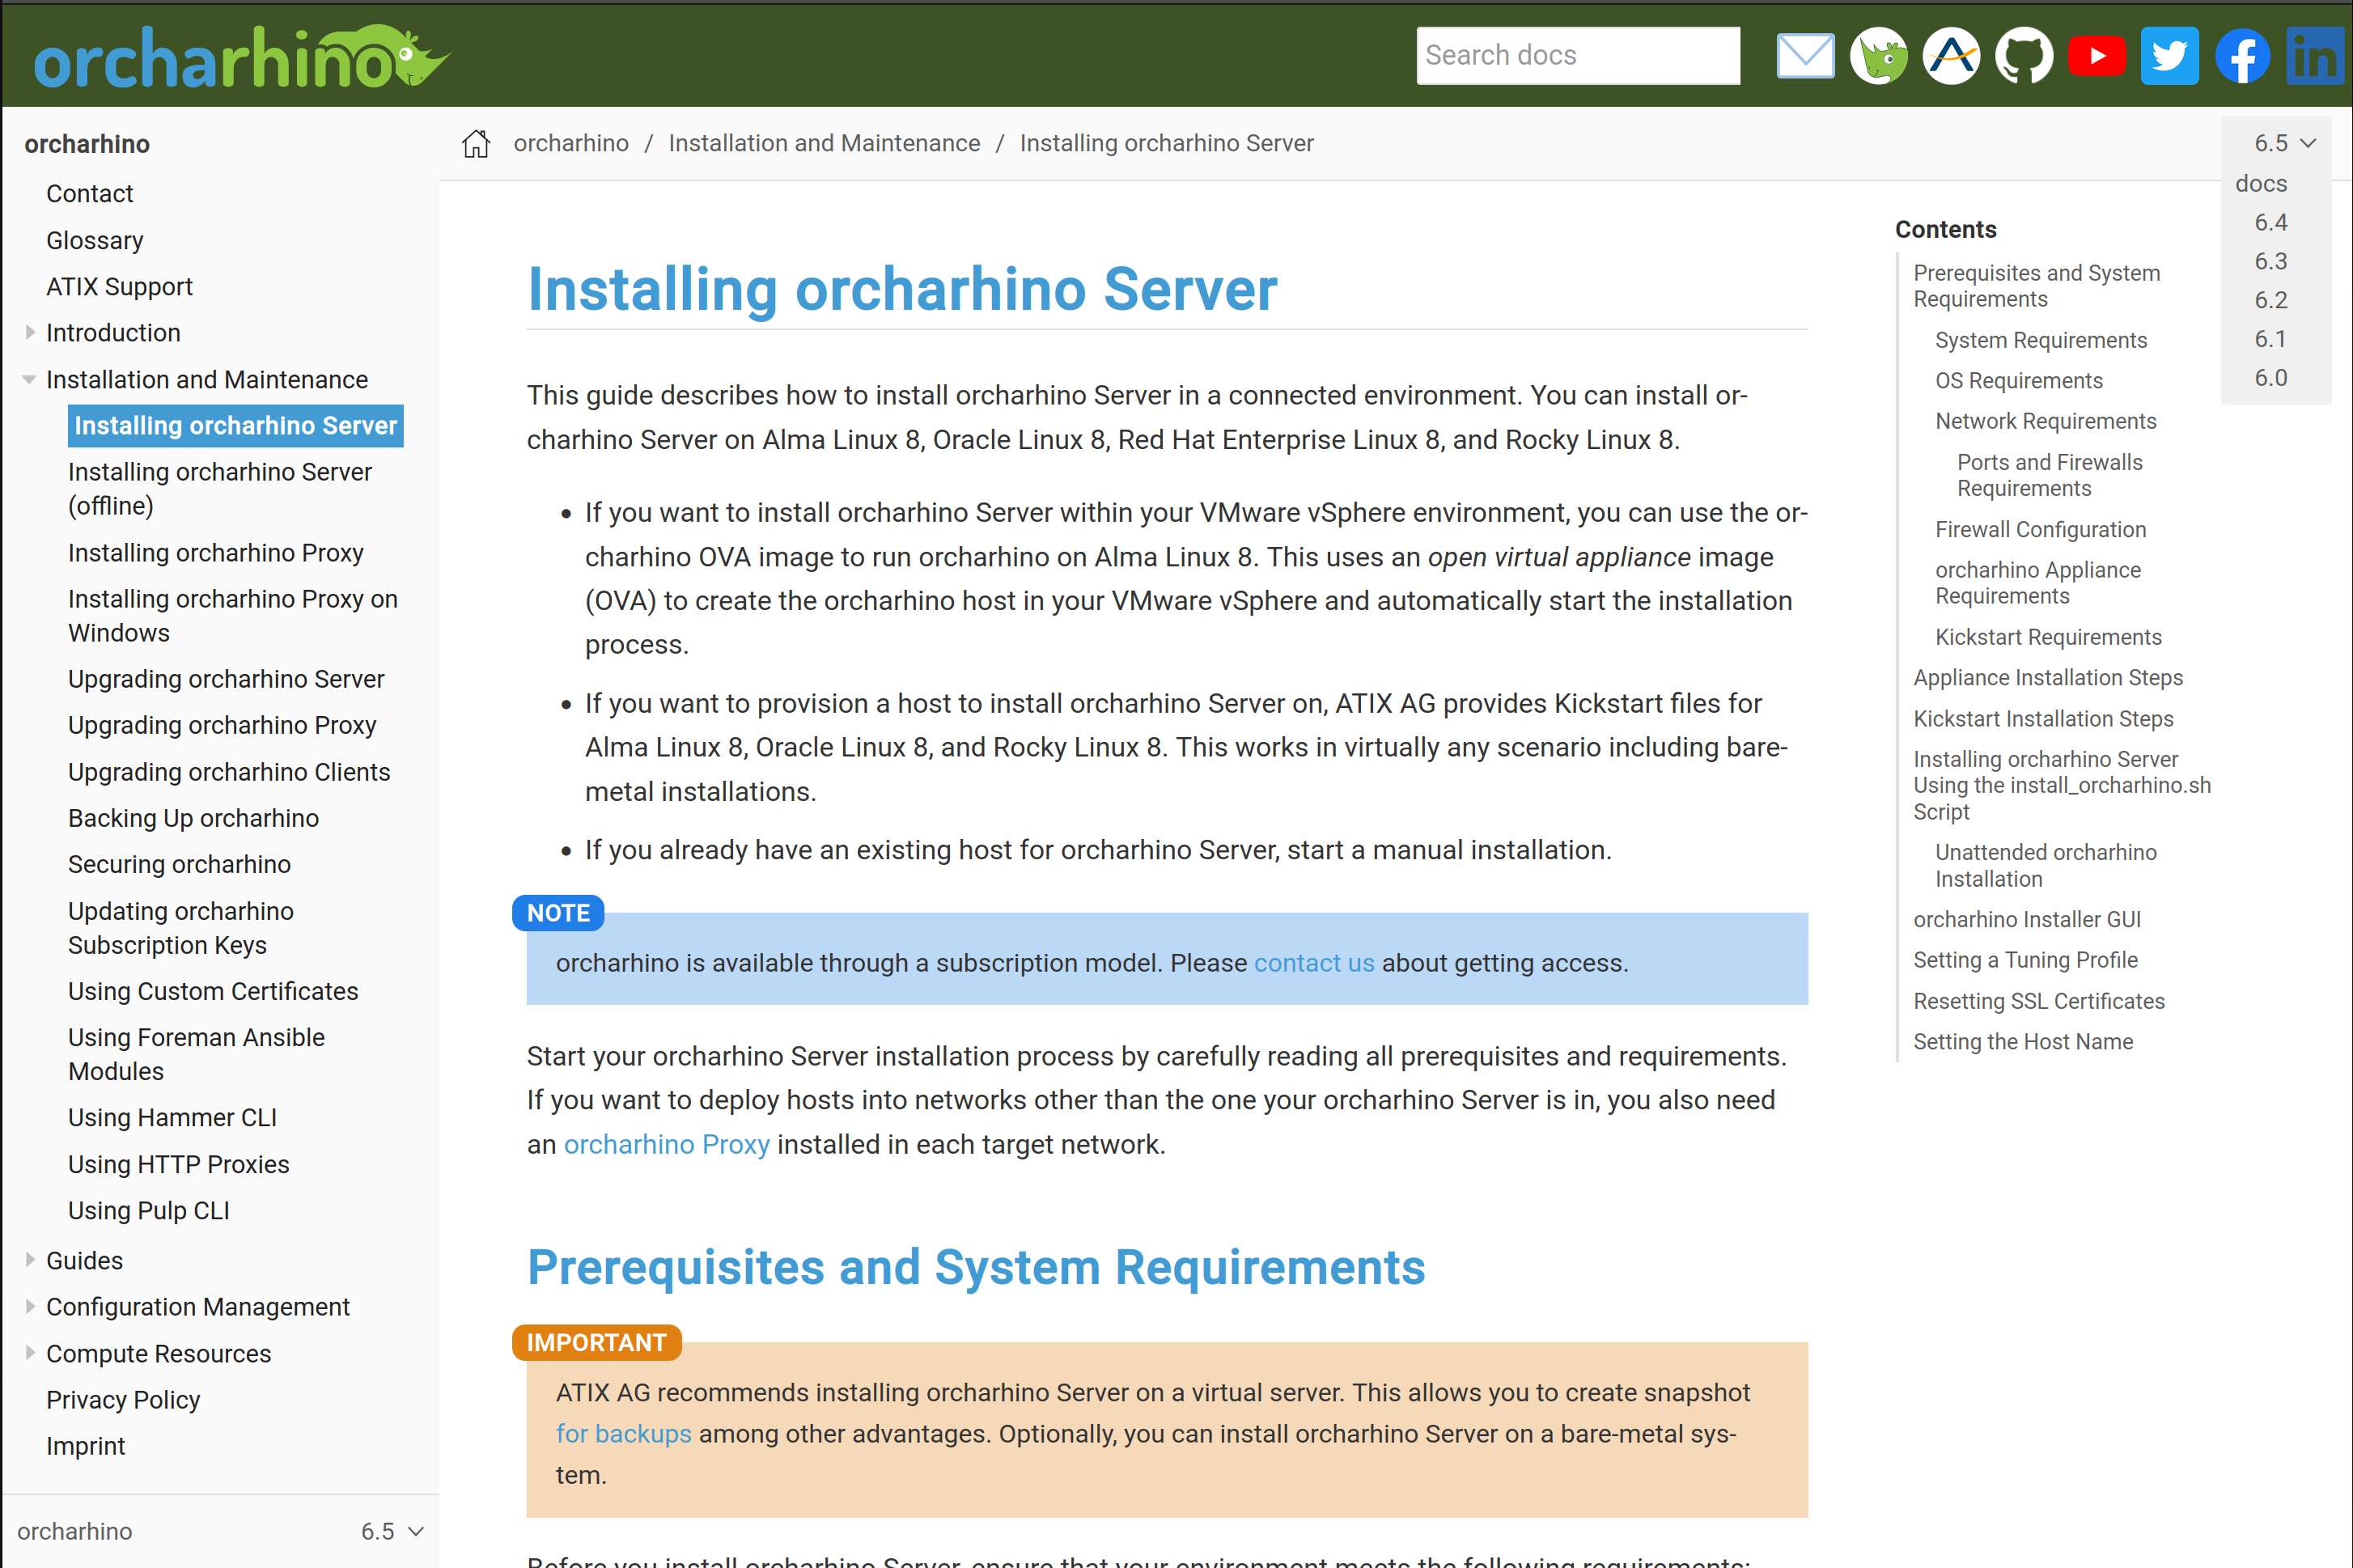 This page shows the "Installing orcharhino Server" guide for orcharhino 6.5; "docs" always points to the latest orcharhino release; and clicking "6.4" in the top right corner brings you to the same page but for verion 6.4; the menu in the bottom left switches versions but you'll start at the "homepage" again for the selected version.